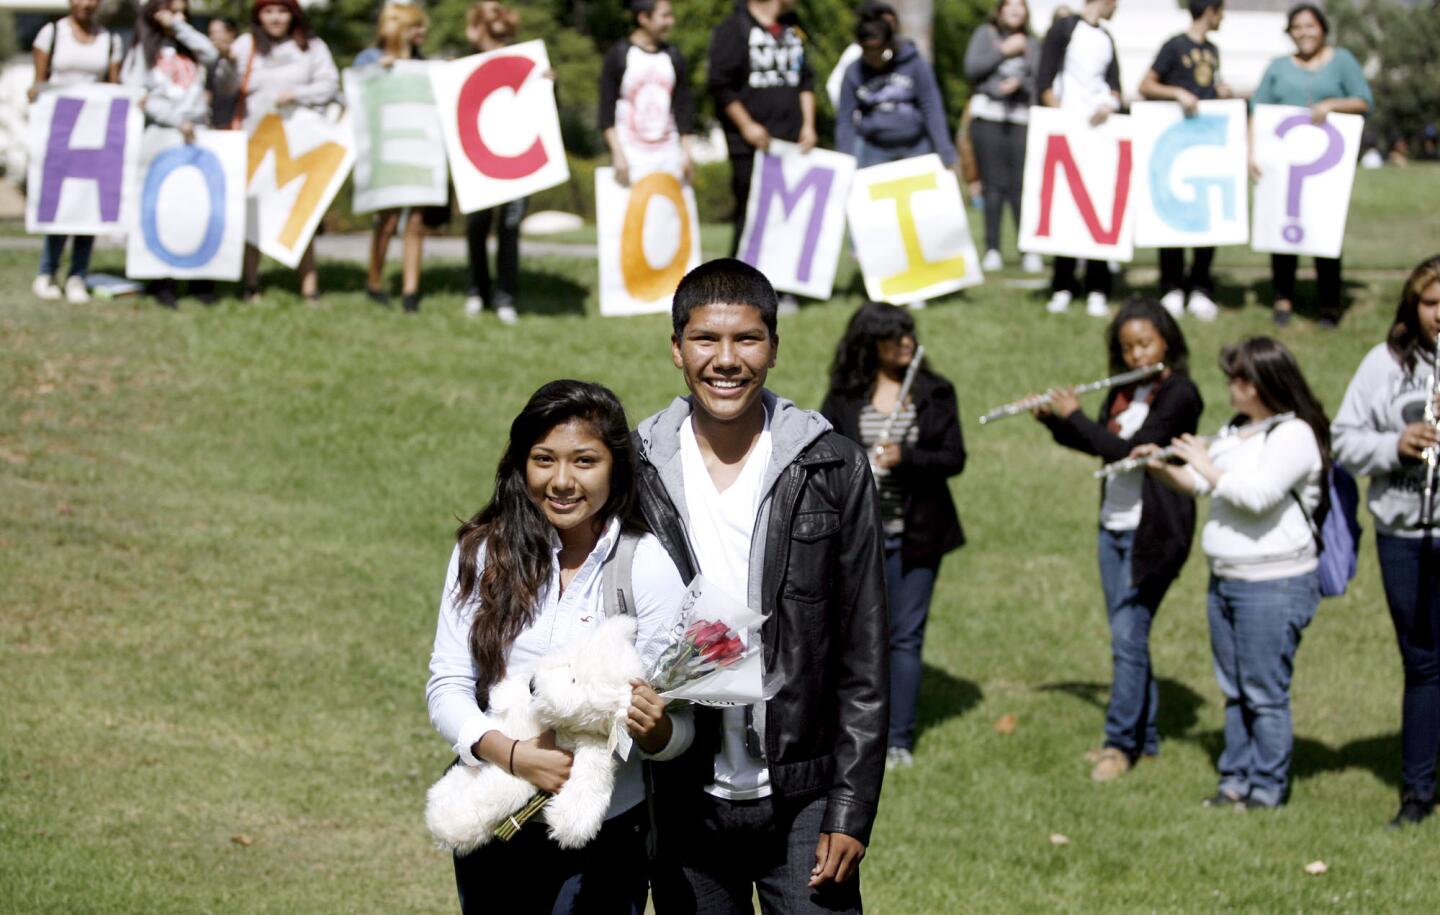 Photo Gallery: Popping the Homecoming question with a twist